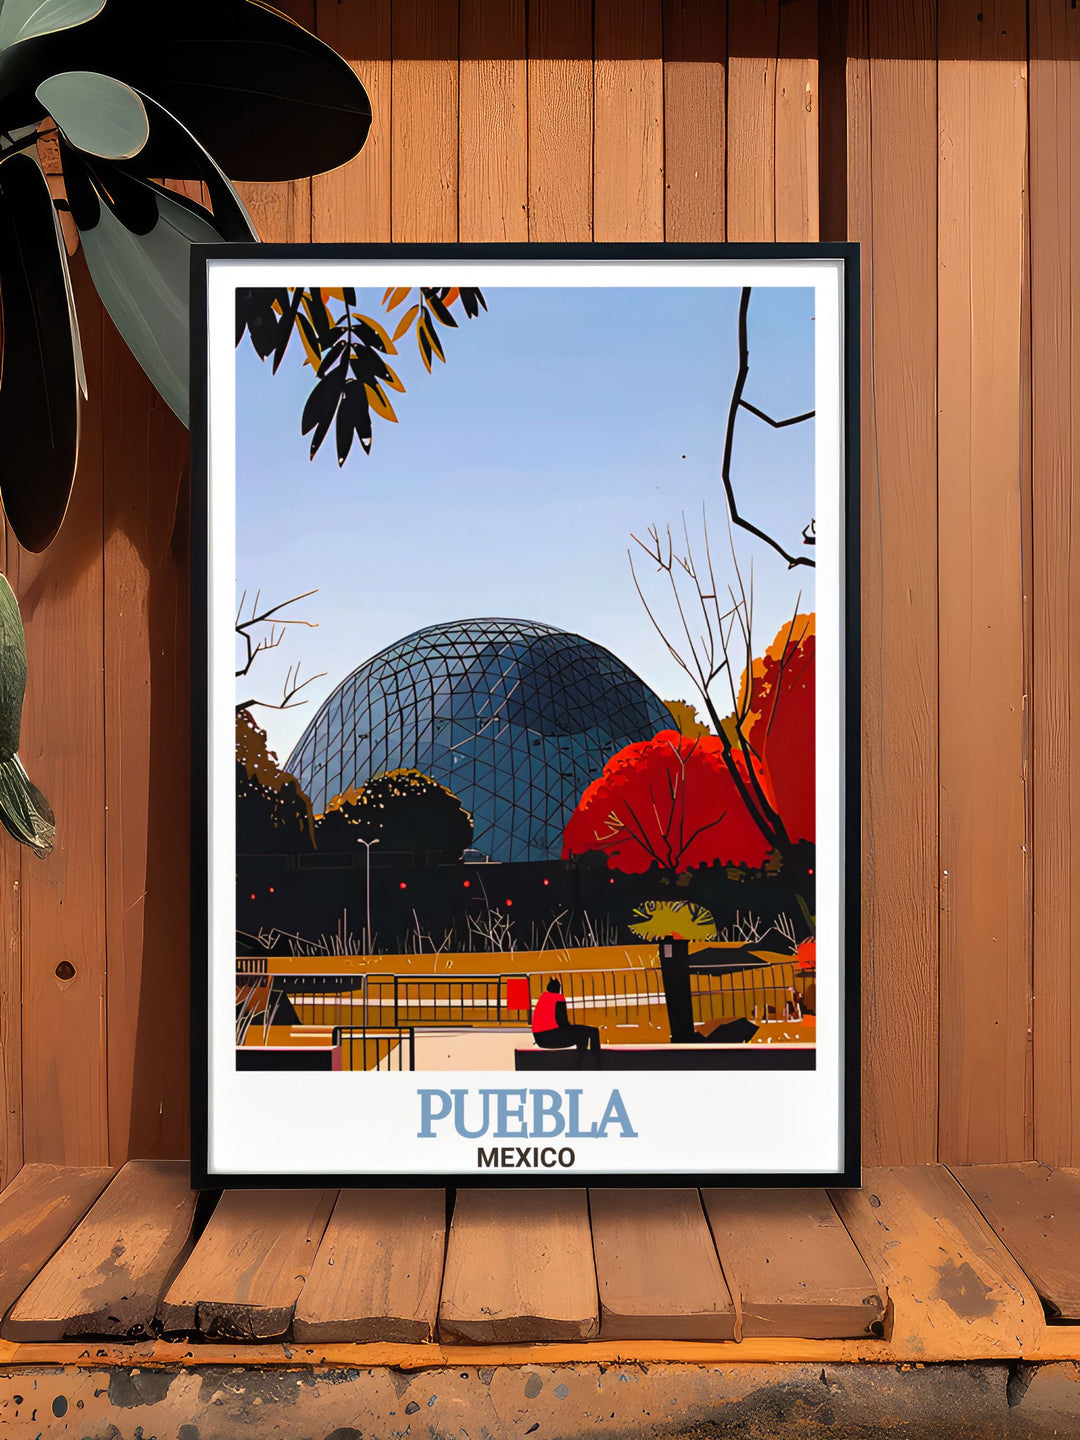 Artistic Puebla Painting capturing the charm and vibrancy of this Mexican city Parque Ecoogico Revolucion Mexicana elegant home decor pieces designed to add sophistication and natural beauty to any room perfect for personalized gifts and travel poster prints